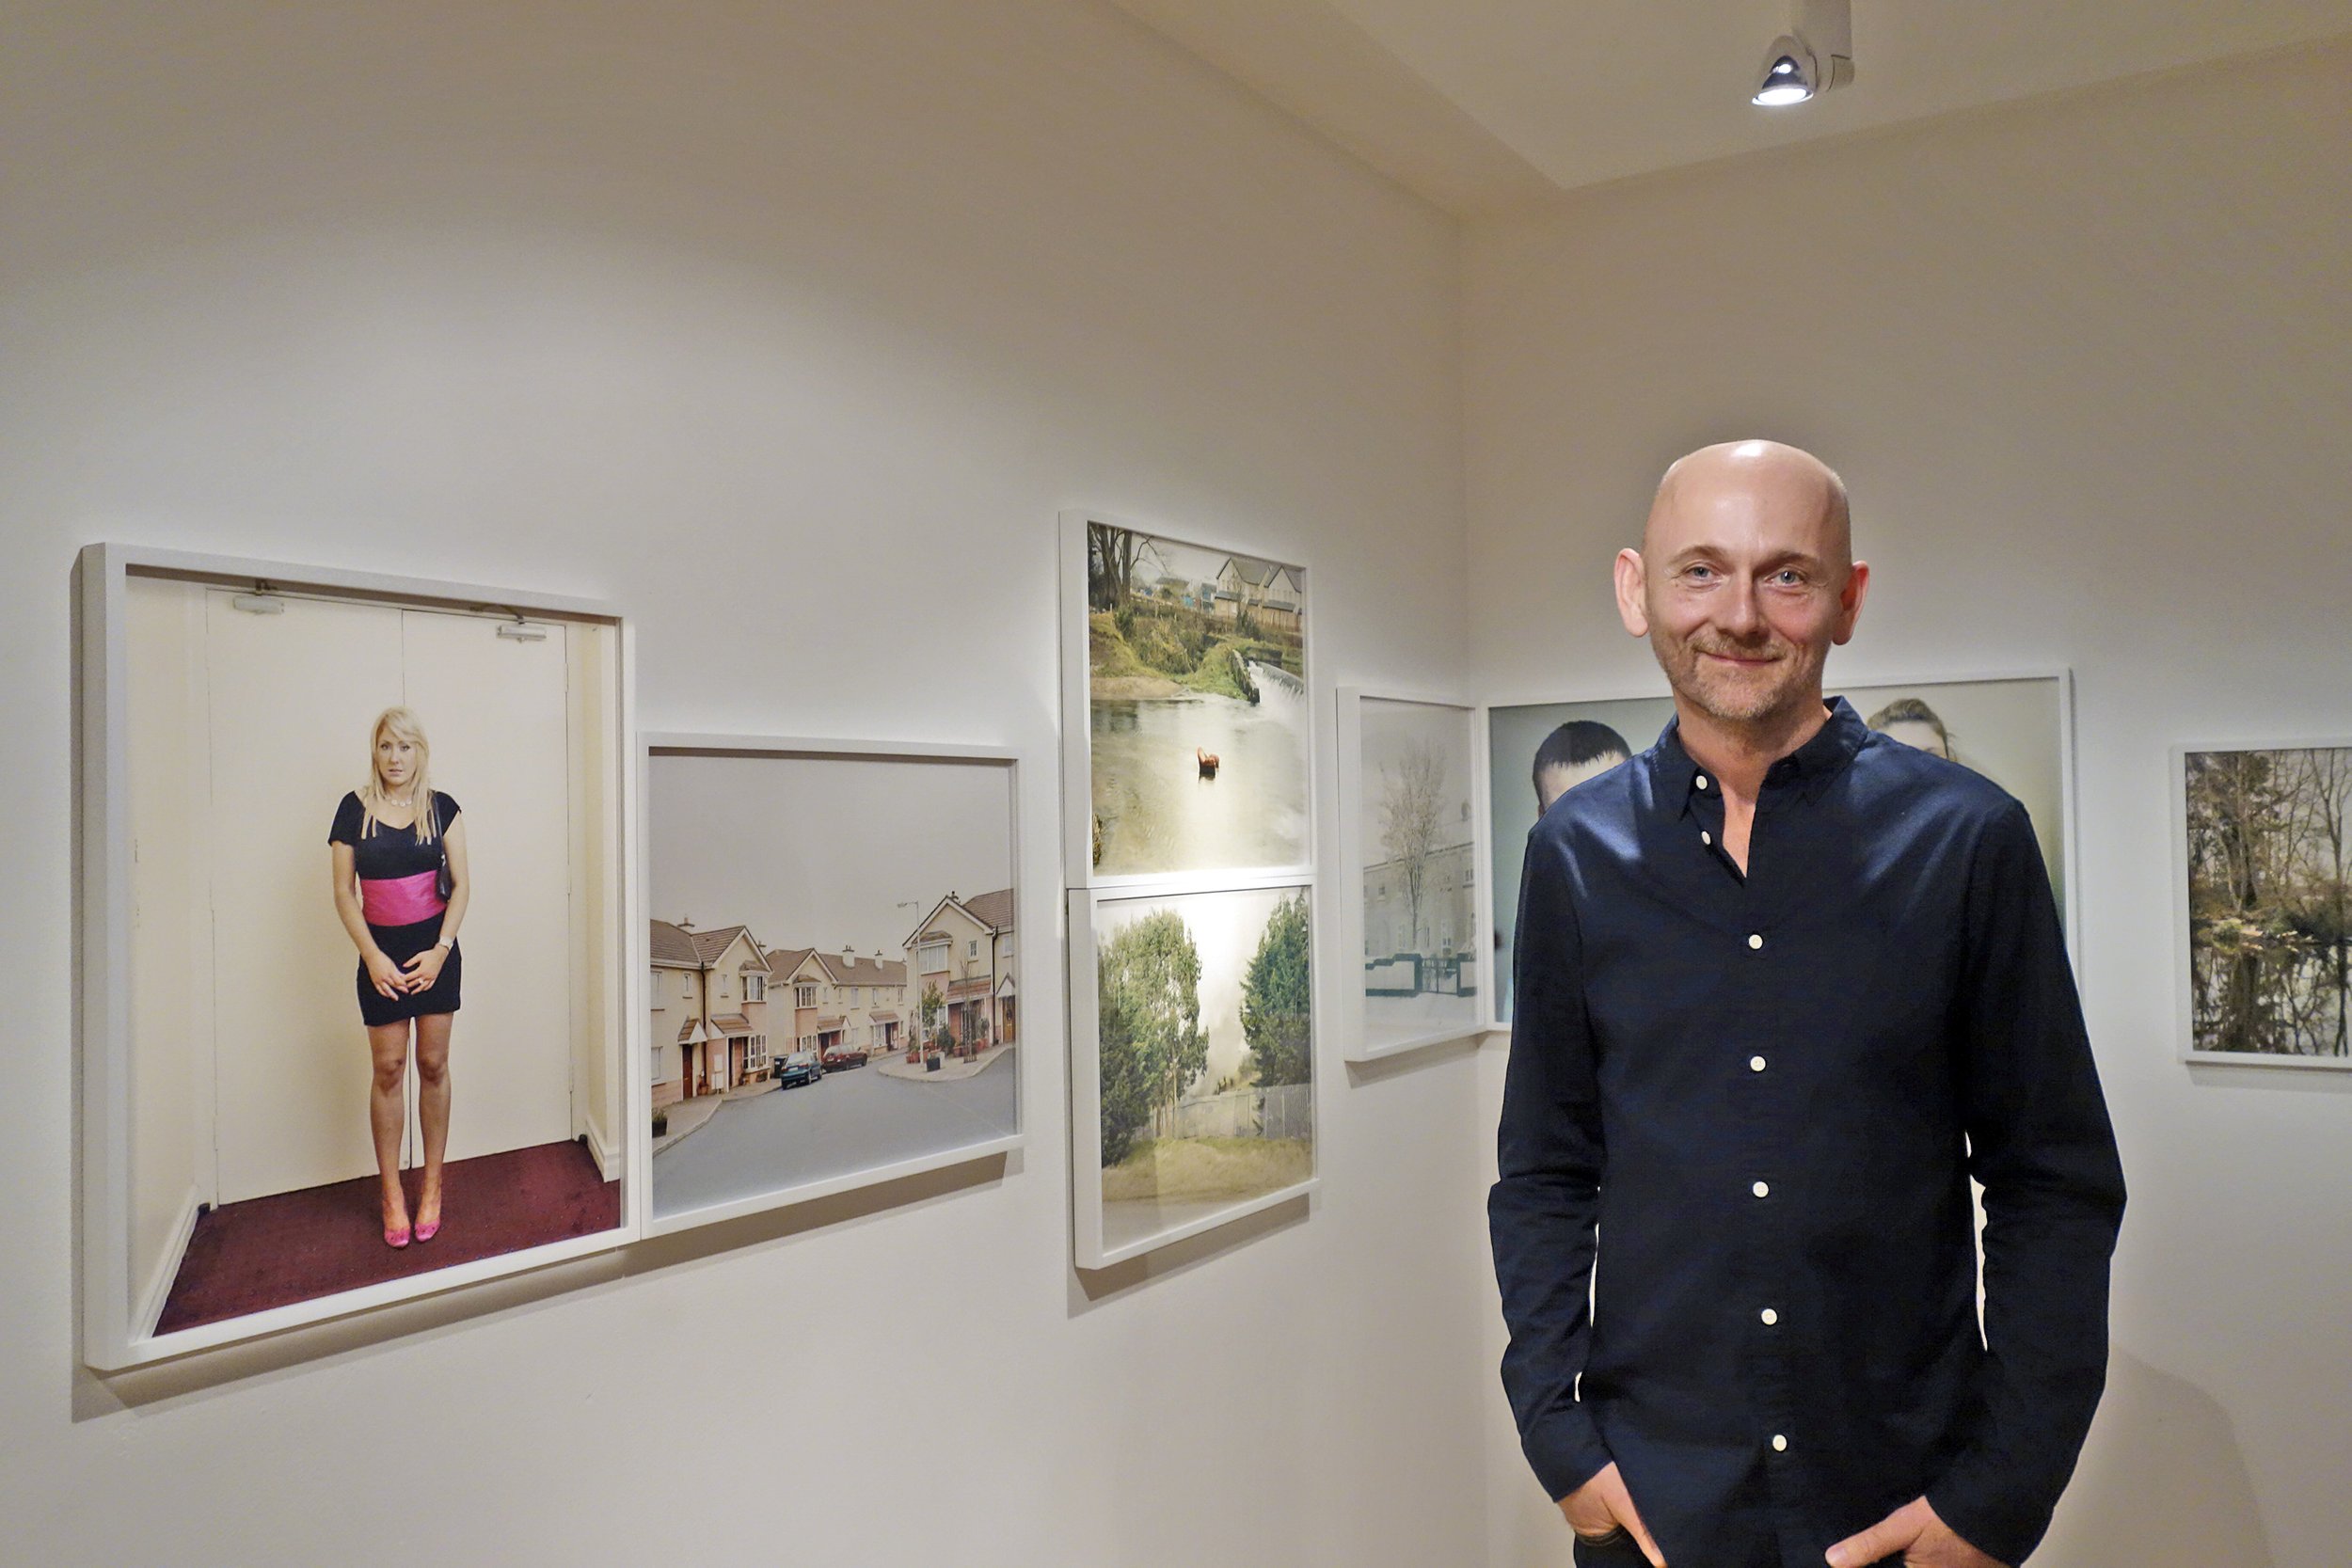  Photographer Enda Bowe with his work 